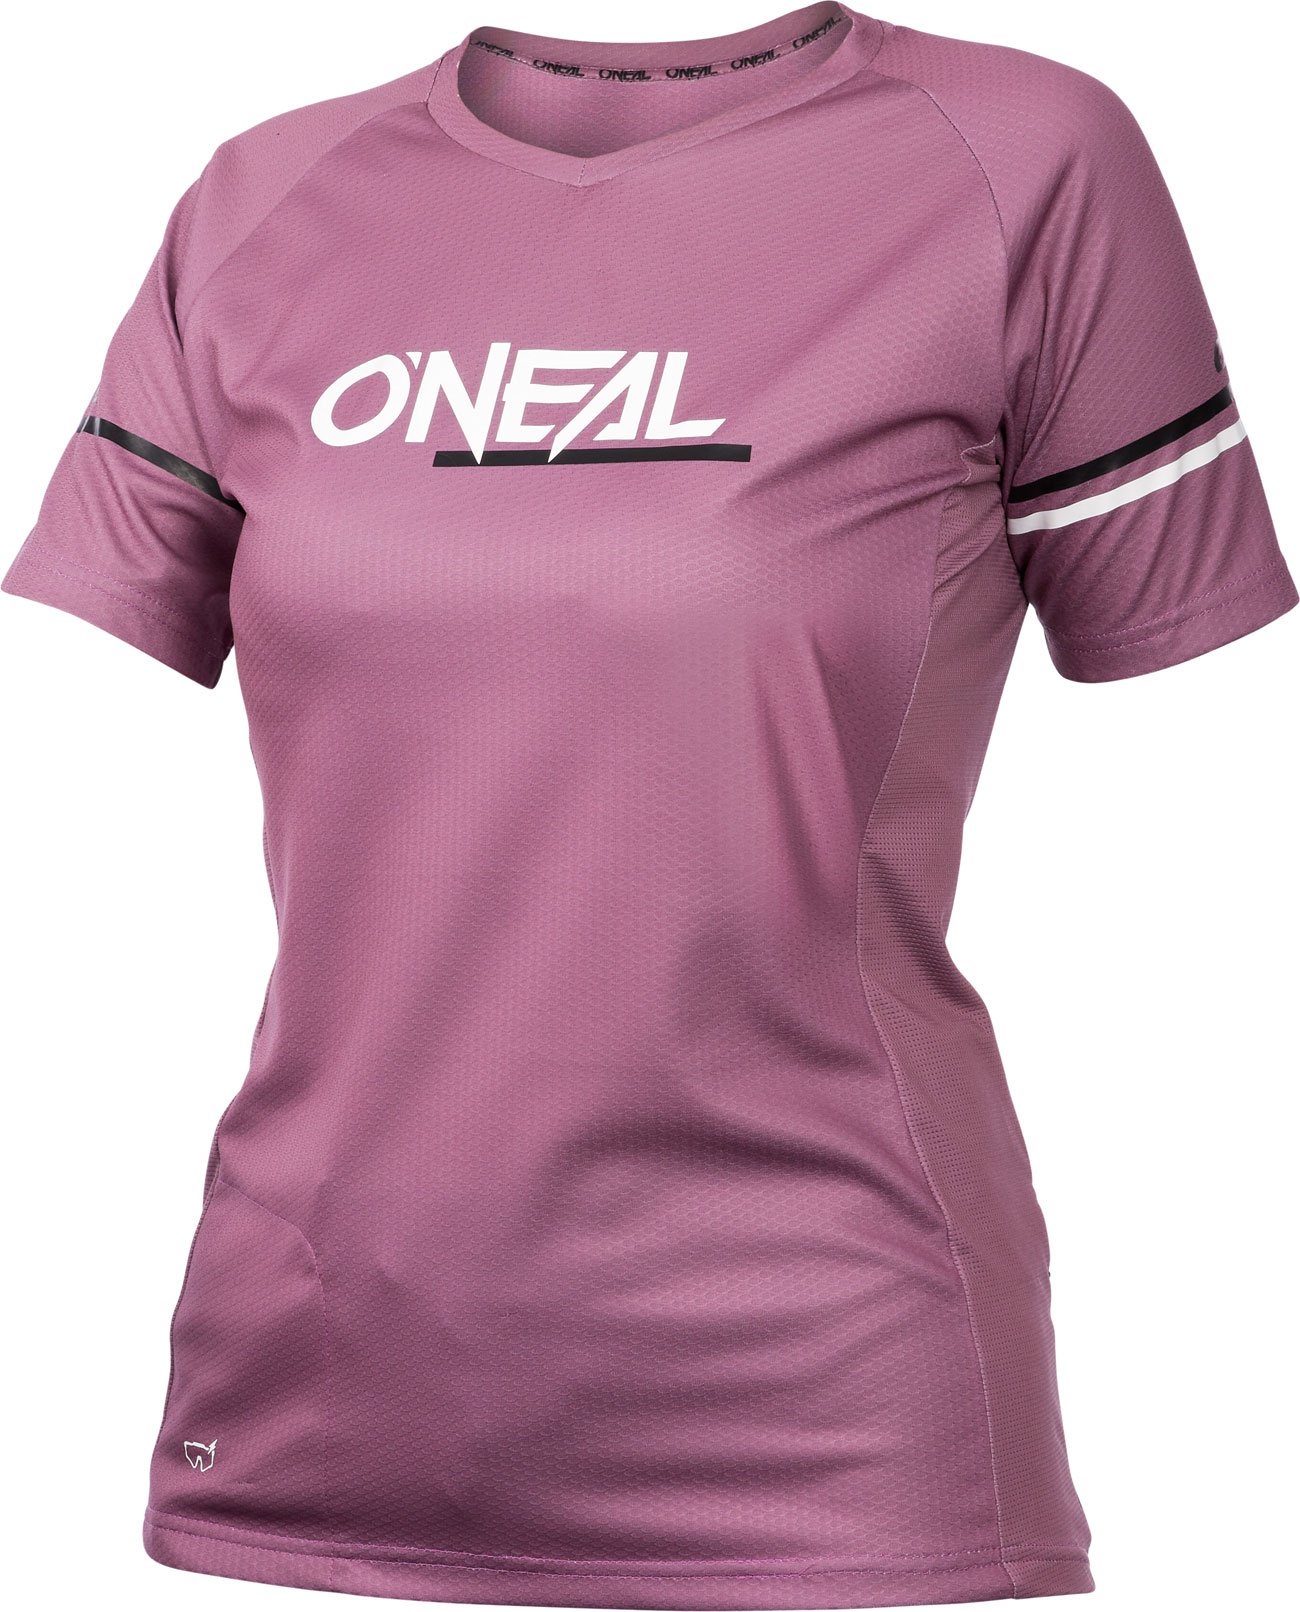 ONeal Soul S23, maillot femme - Fuchsia - XL